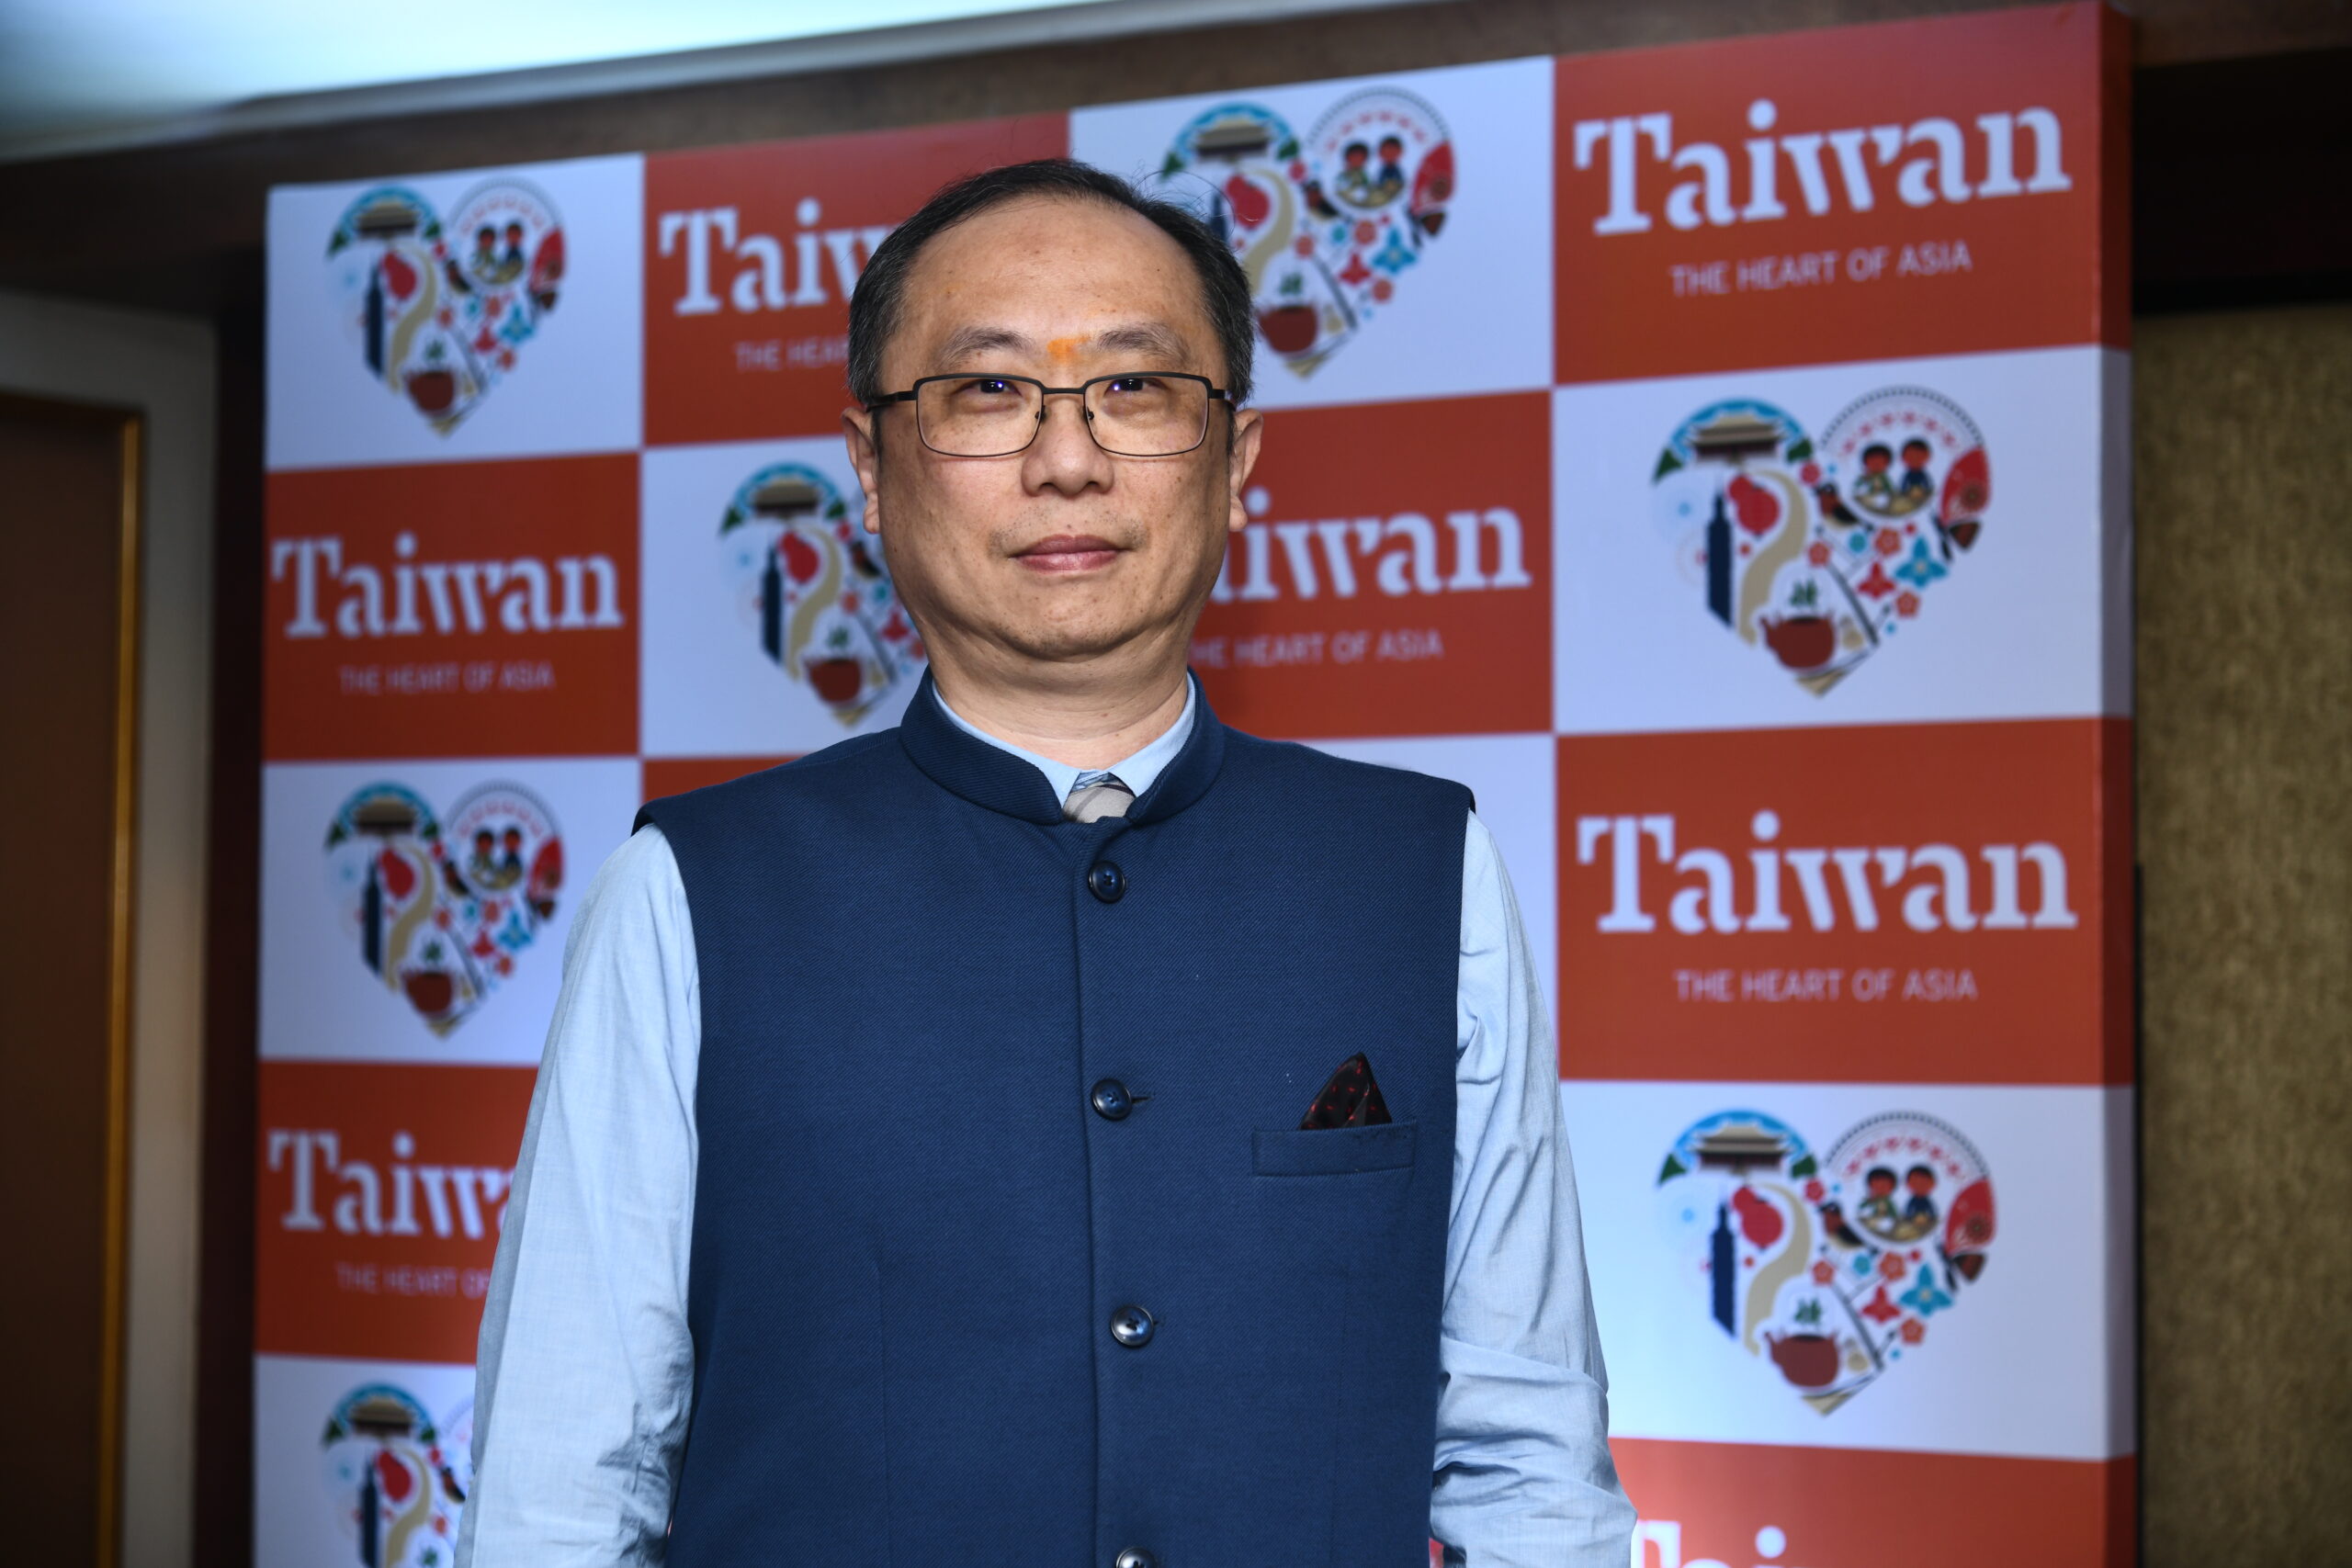 Taiwan Tourism concludes its multi-city roadshow in India